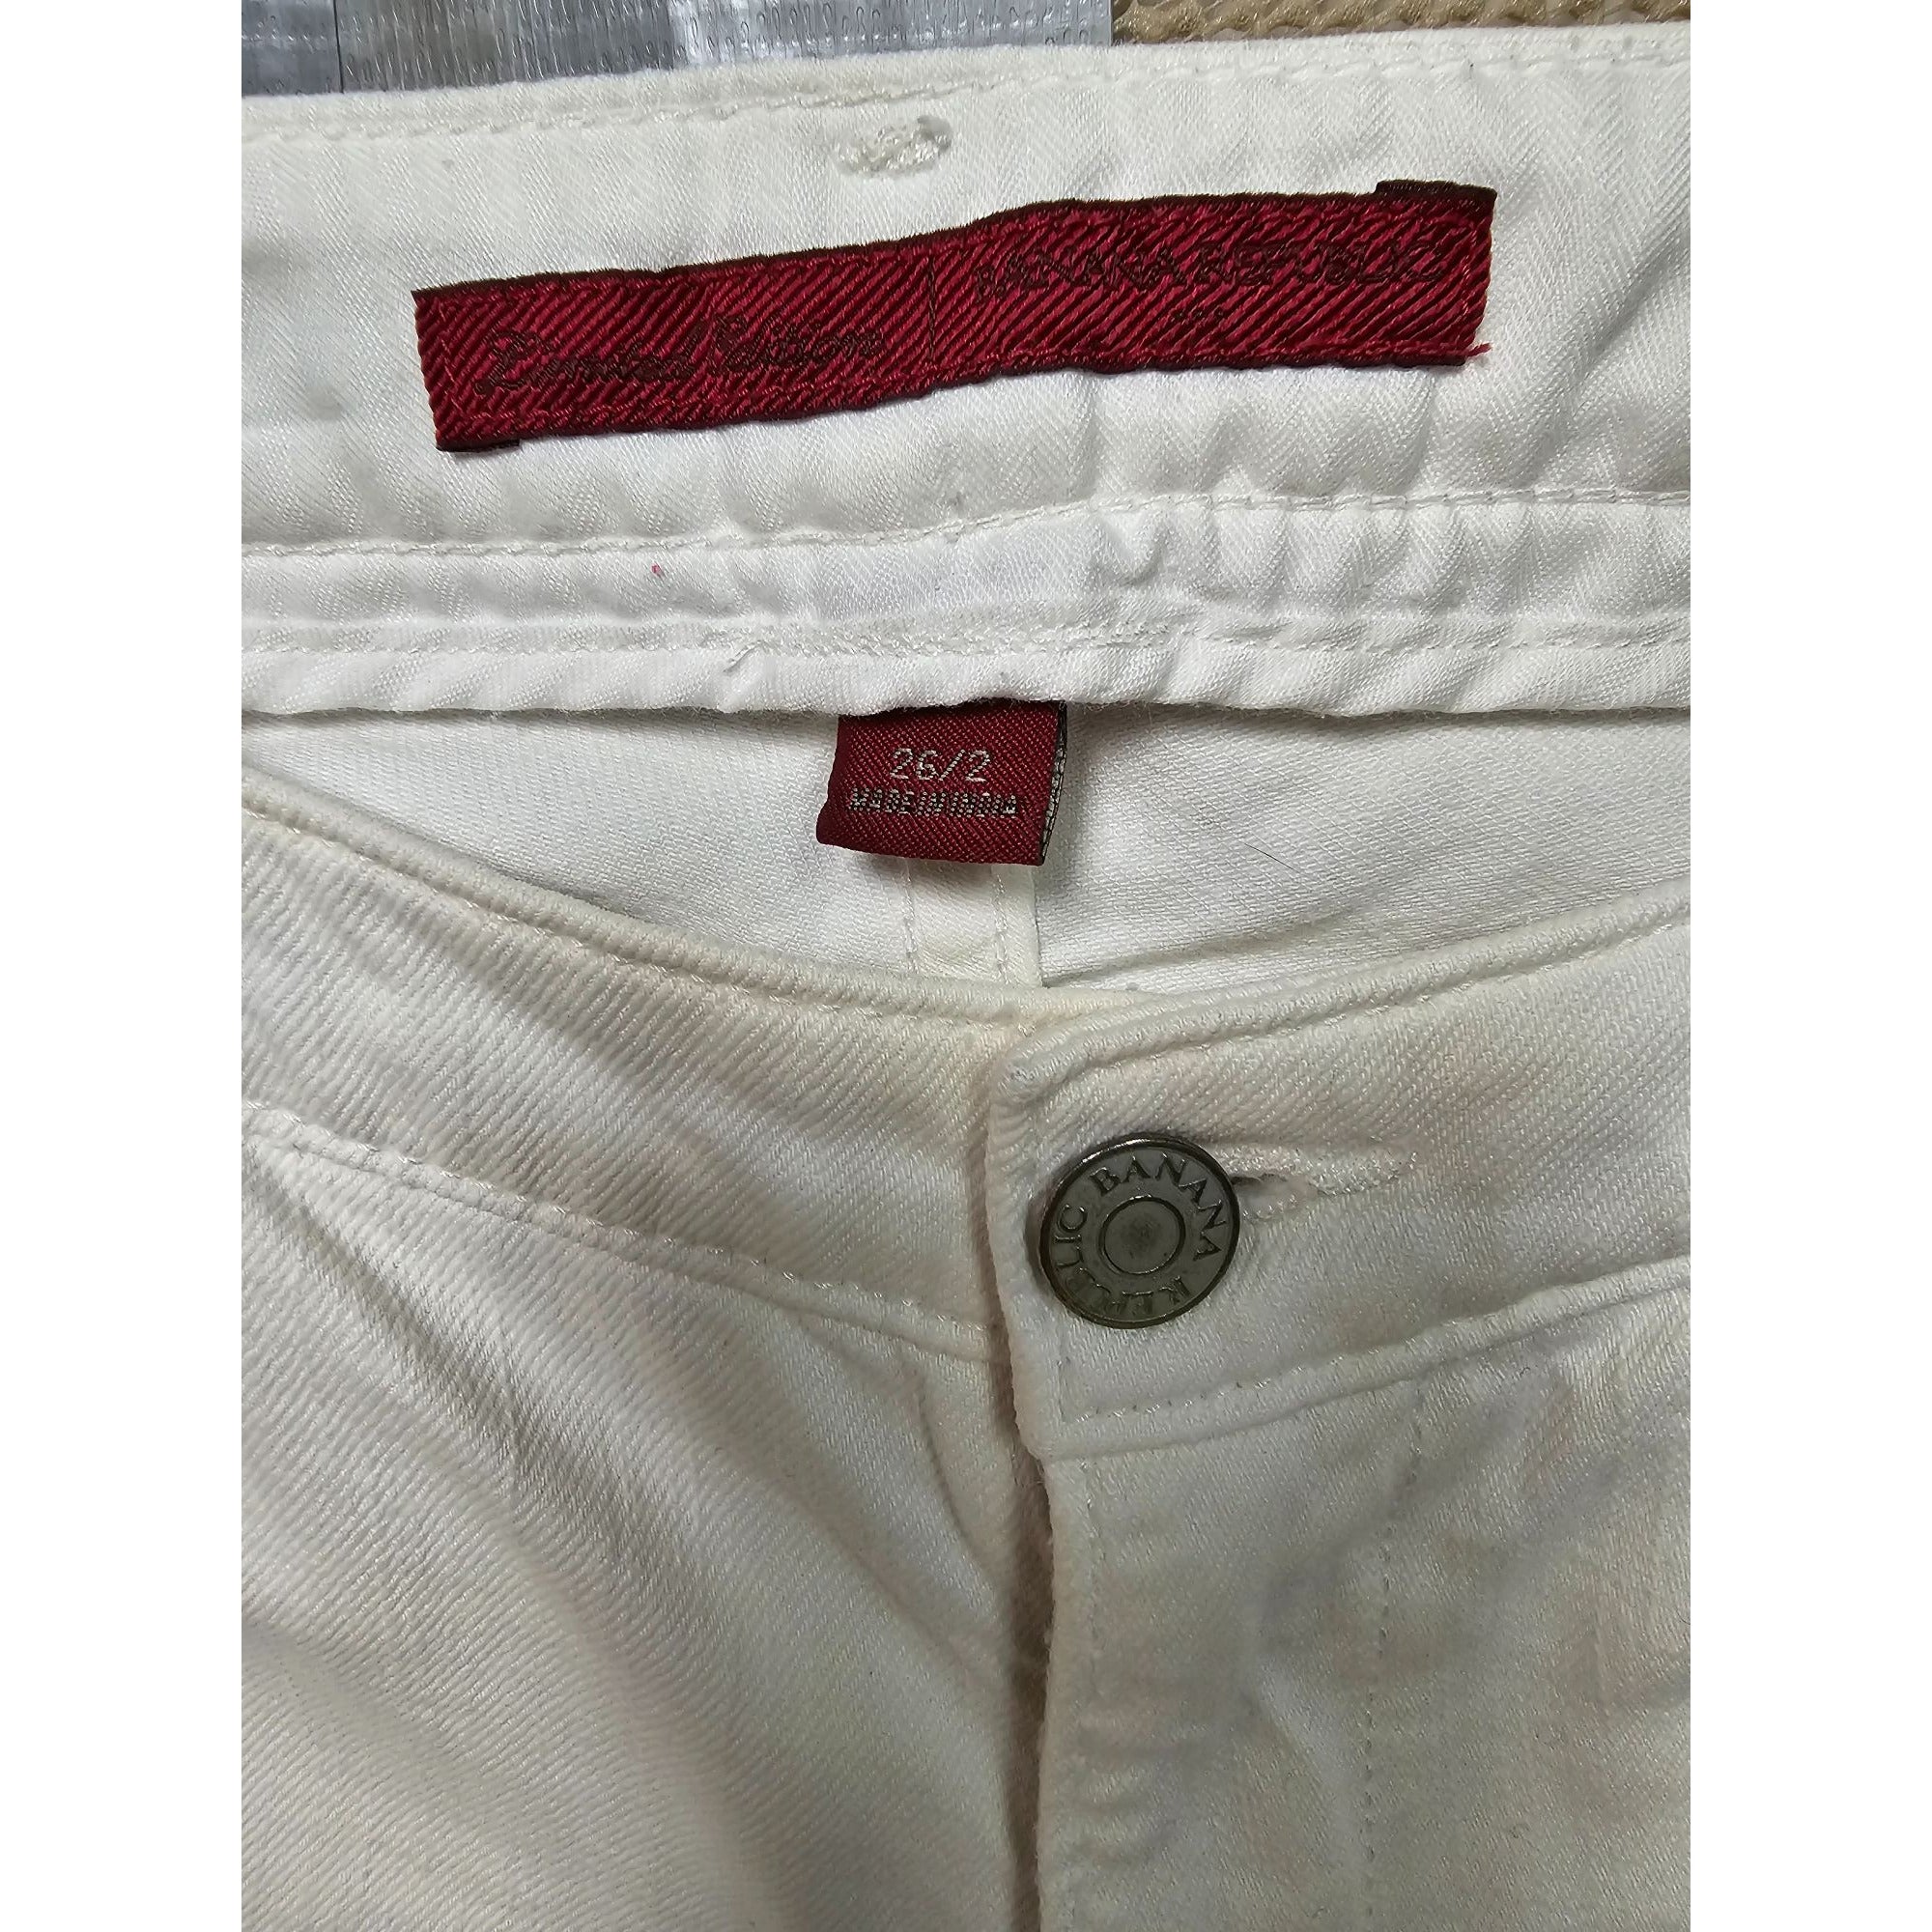 Banana Republic Limited Edition Straight Leg White, Low Waisted Women Jeans